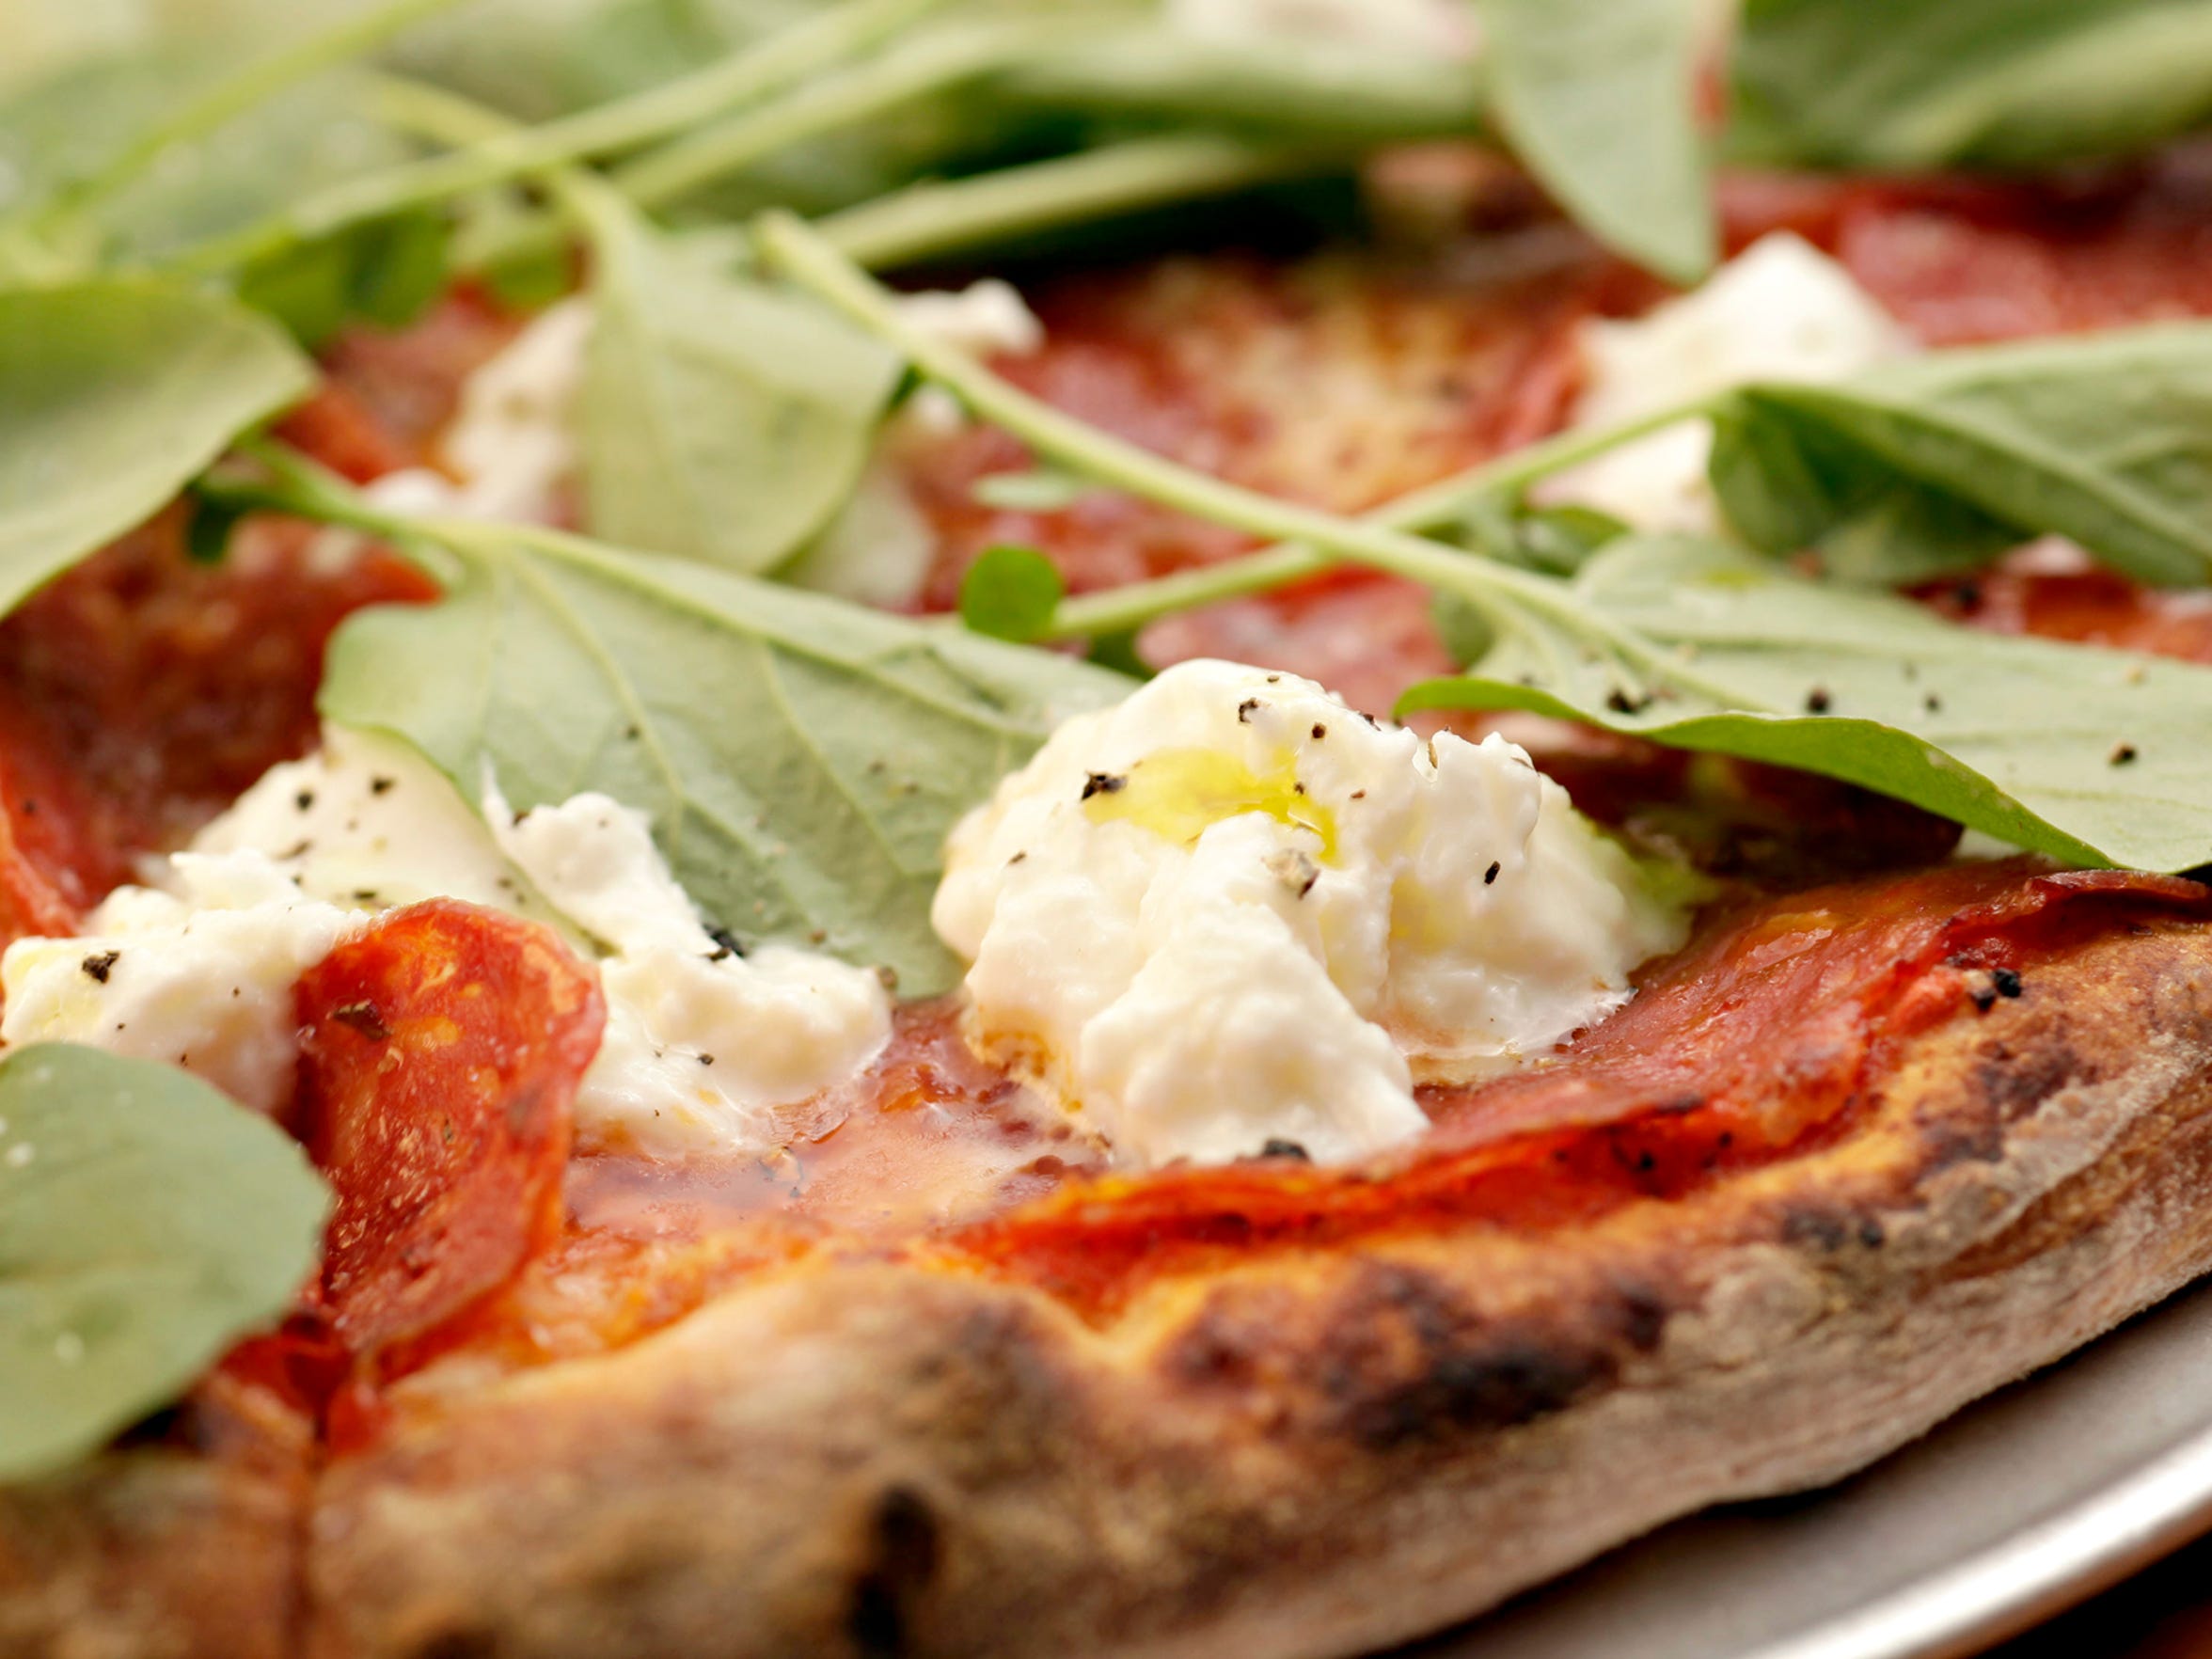 The Calabrian Pizza With Calabrese Salumi Burrata And Watercress From Parlor